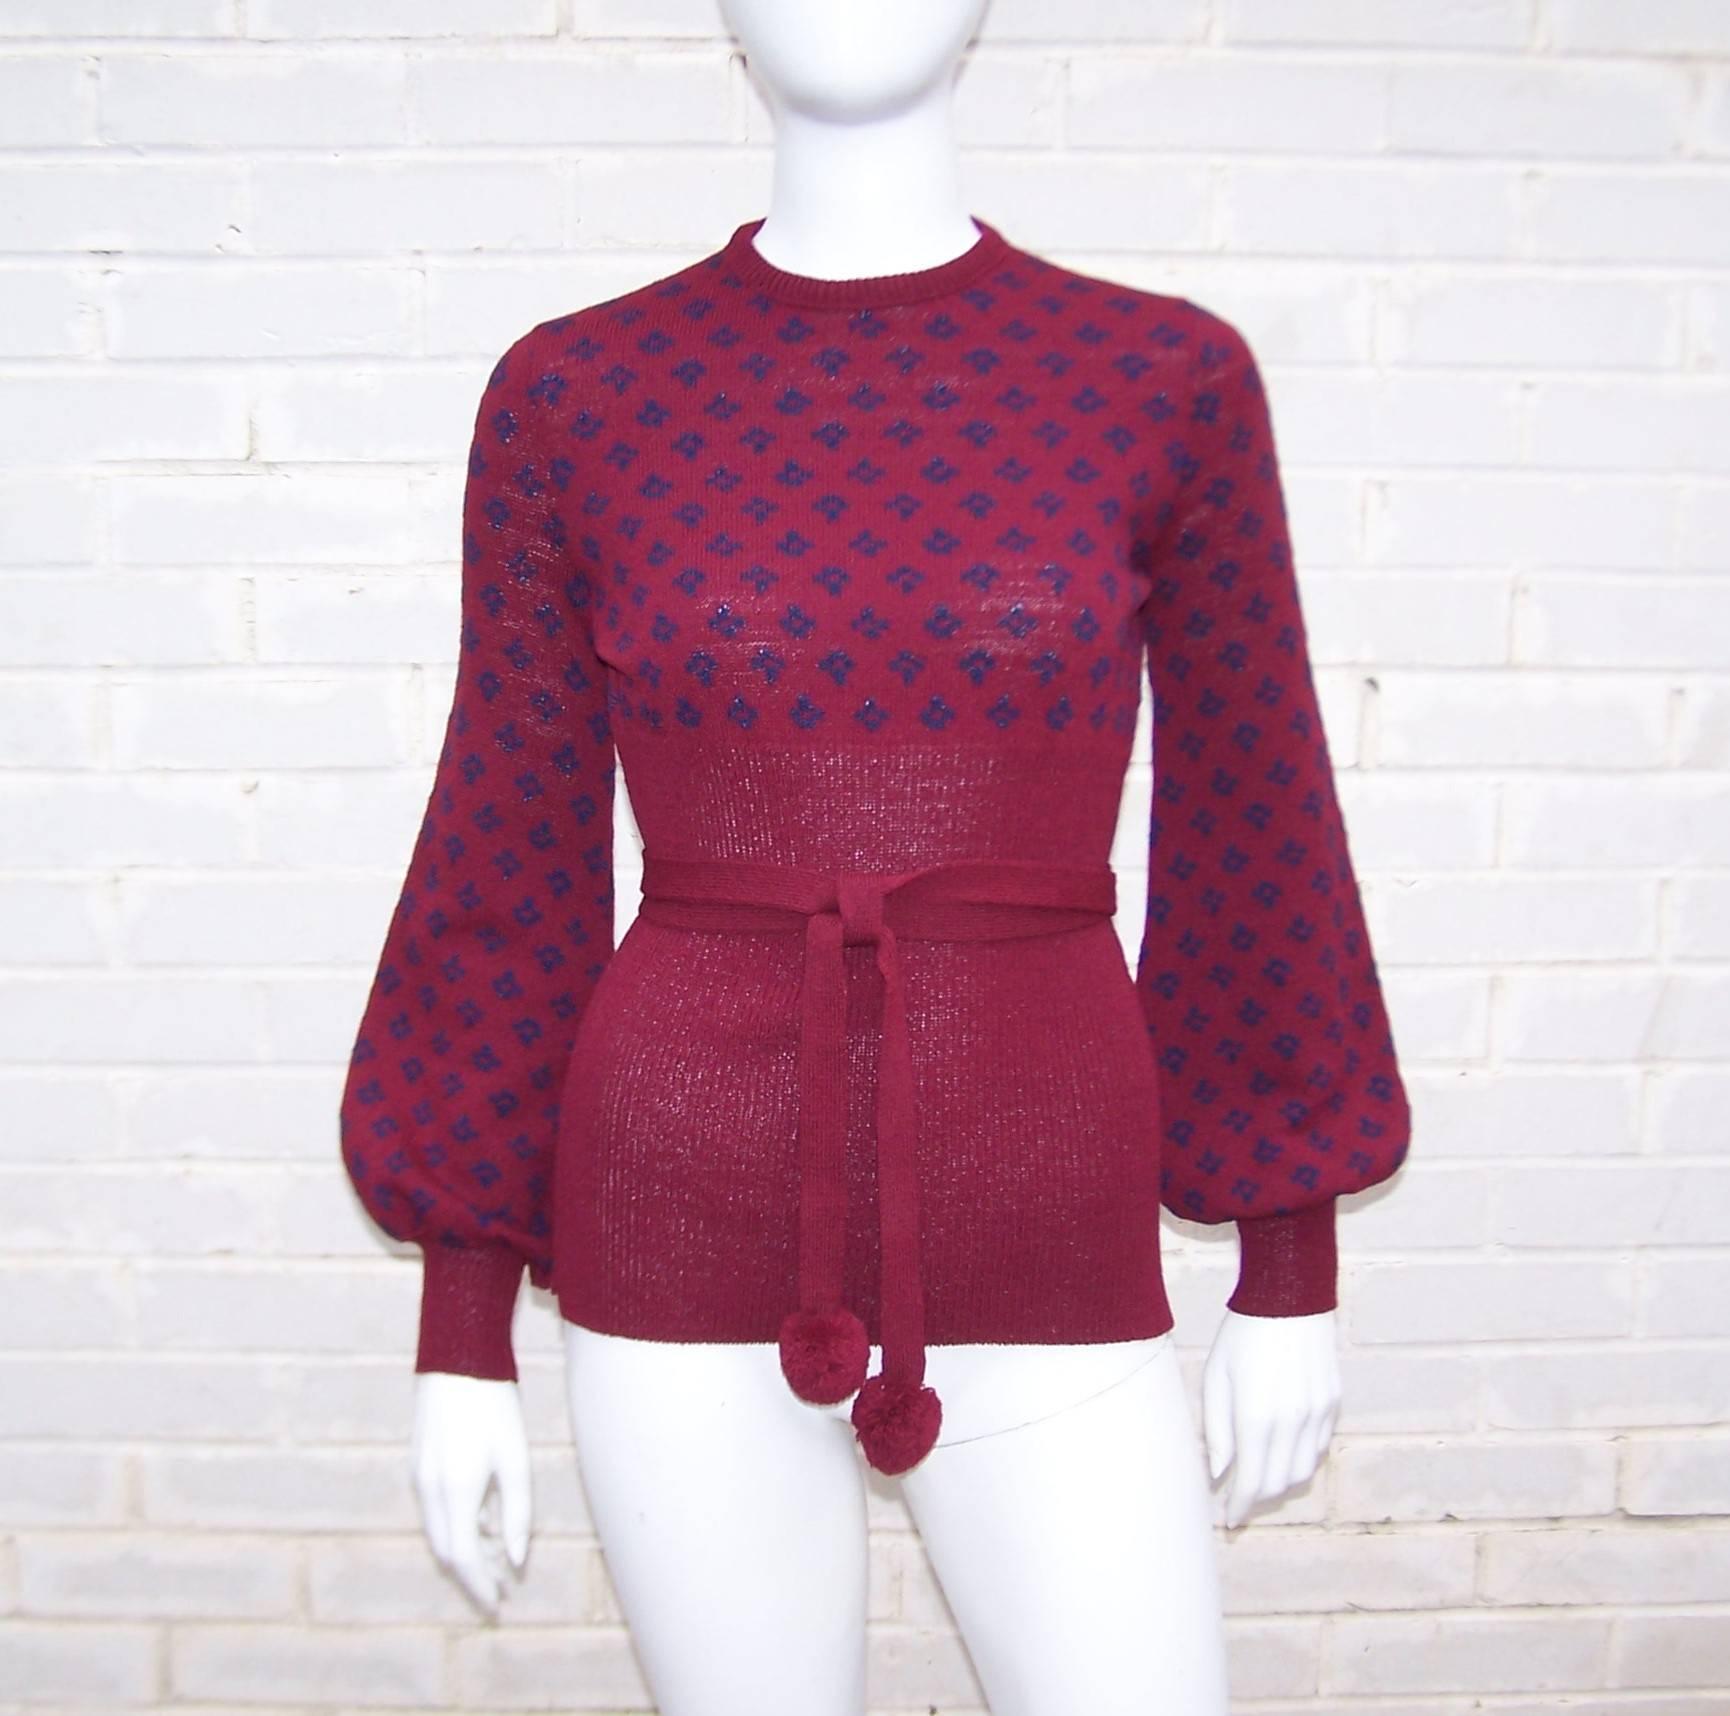 This 1970's Saks Fifth Avenue knitwear top is reminiscent of the sexy skimpy sweaters worn by Jane Fonda's character in Klute.  It zips at the back with a form fitted ribbed empire waistline and skinny shoulders and sleeves that puddle as they near